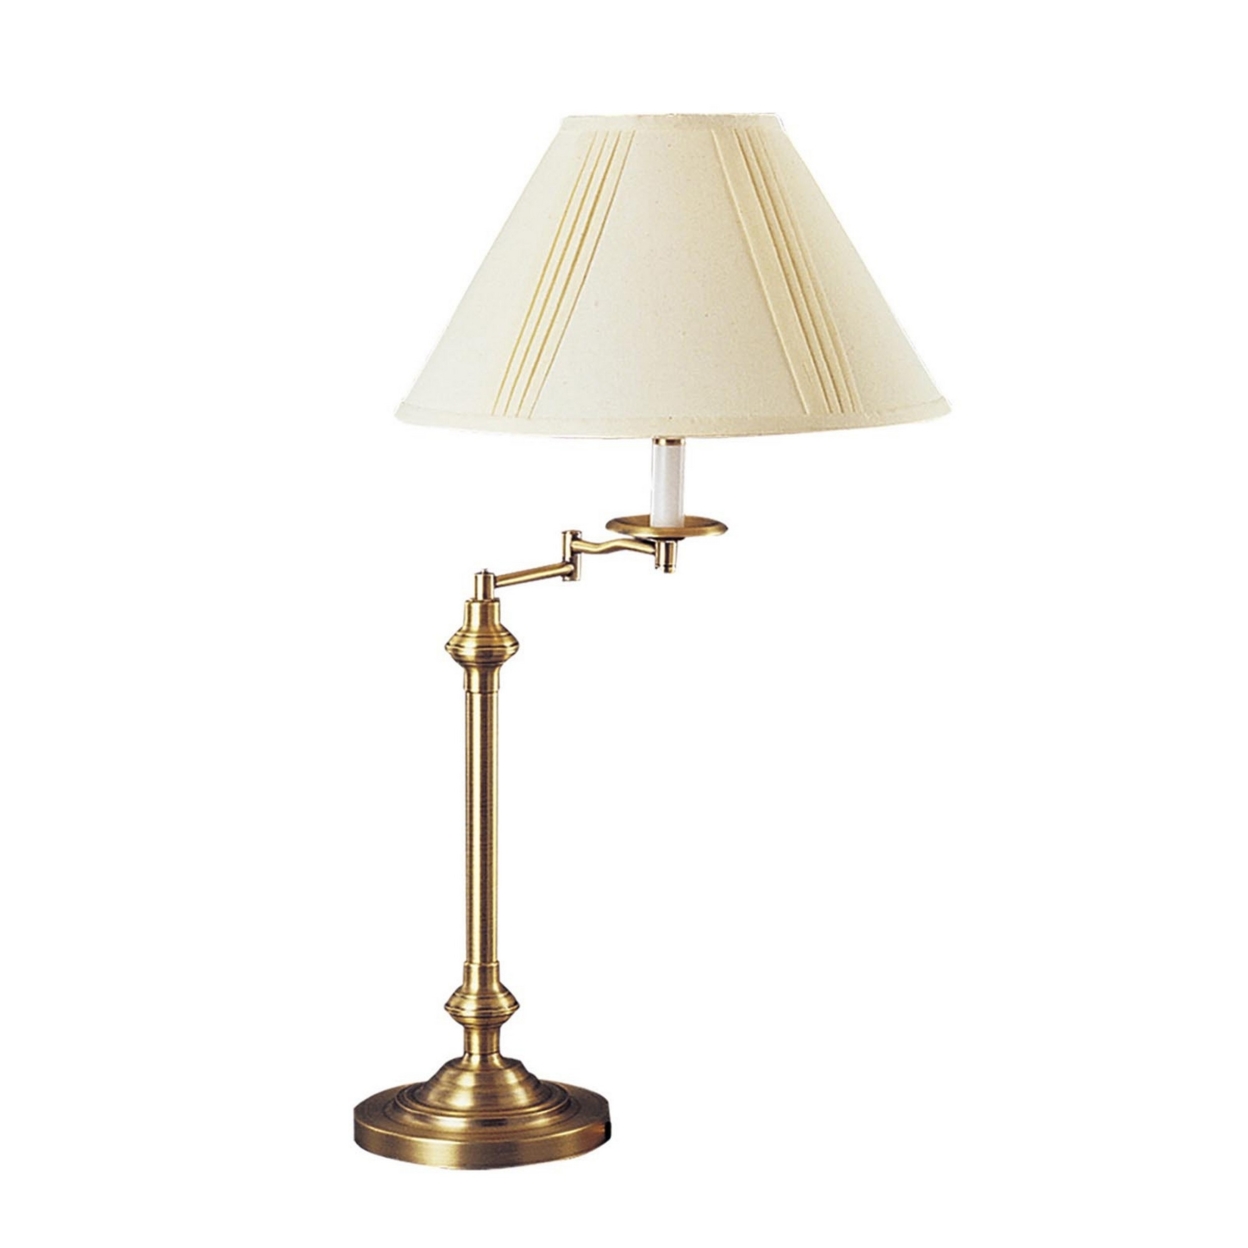 150W Metal Table Lamp With Swing Arm And Fabric Conical Shade,Set Of 4,Gold- Saltoro Sherpi